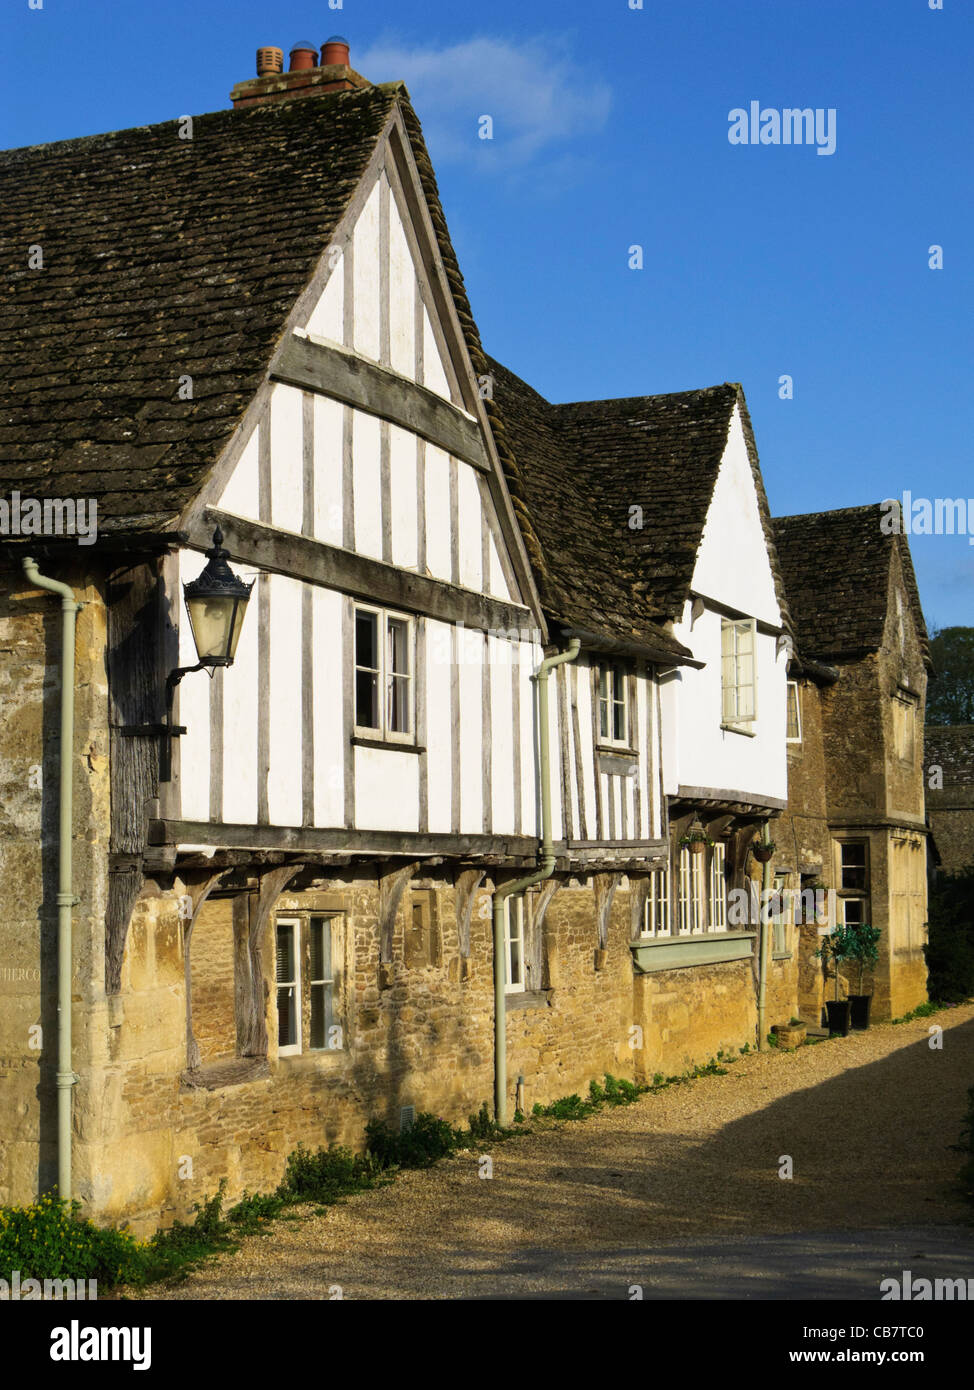 Medieval half timbered houses in Lacock Village, Wiltshire, England, UK Stock Photo